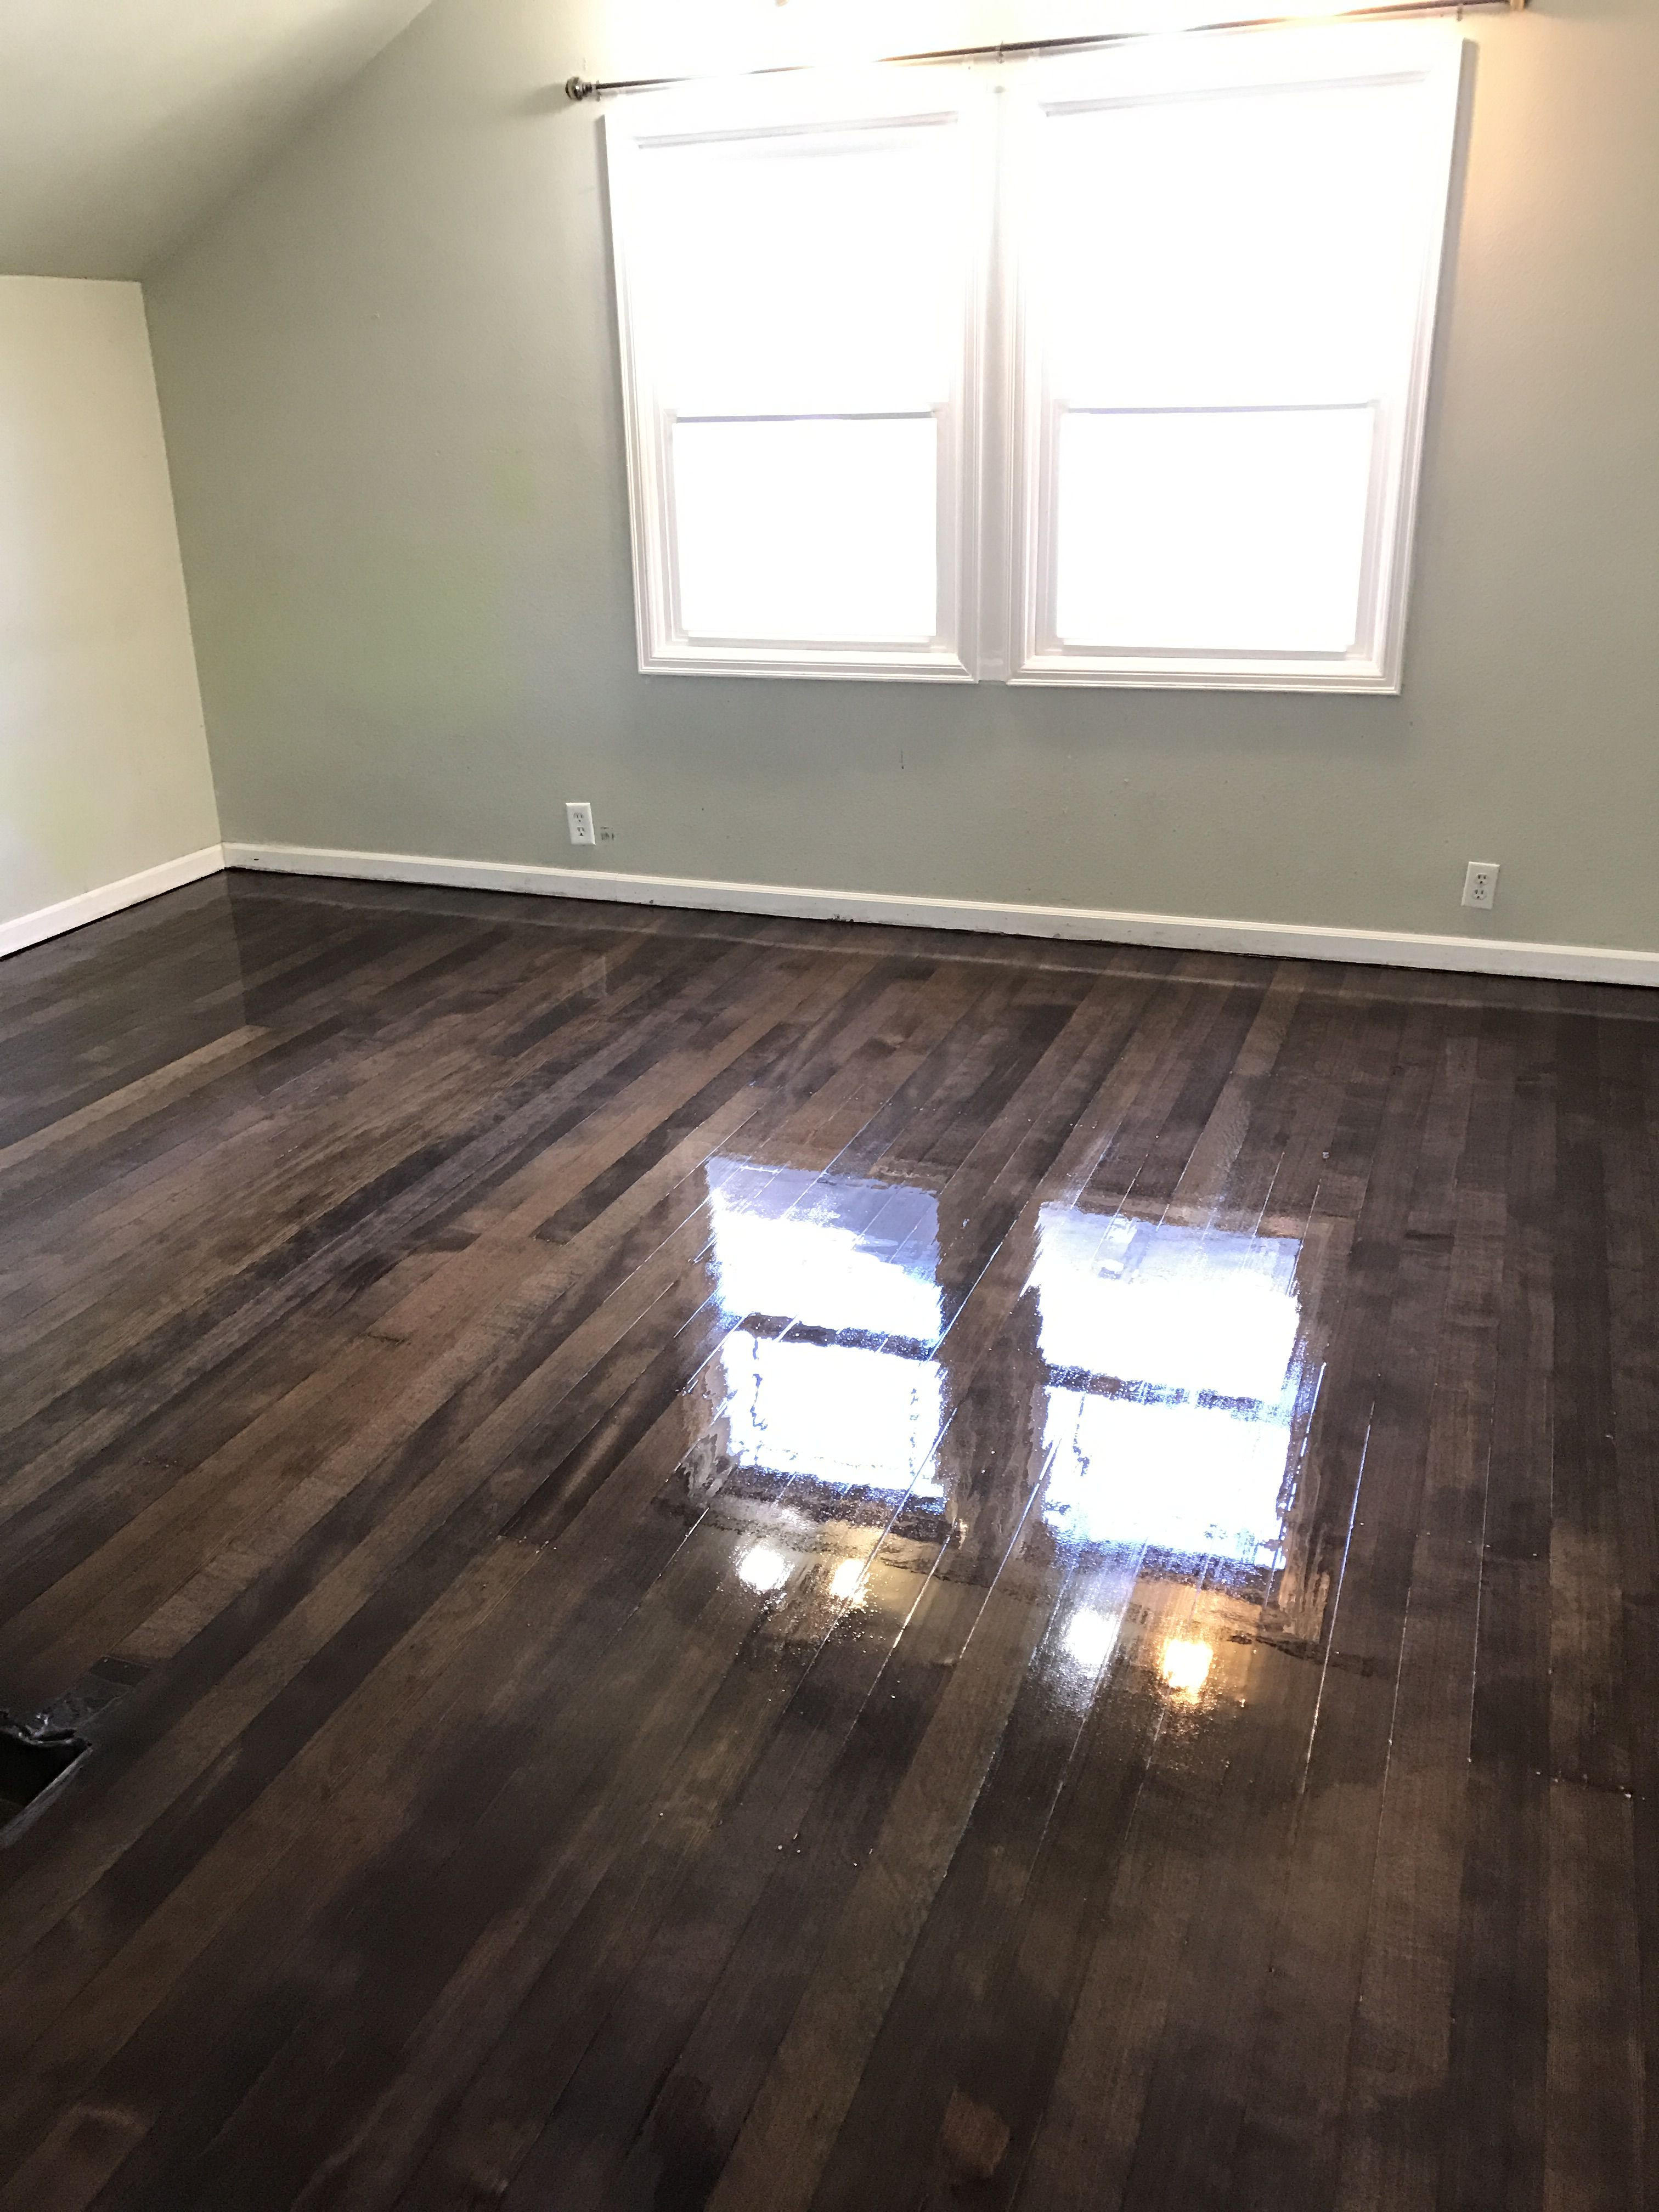 10 Lovely Cost to Refinish and Stain Hardwood Floors 2024 free download cost to refinish and stain hardwood floors of cost of refinishing wood floors types hardwood flooring ers guide intended for cost of refinishing wood floors jacobean stained fir wood floors